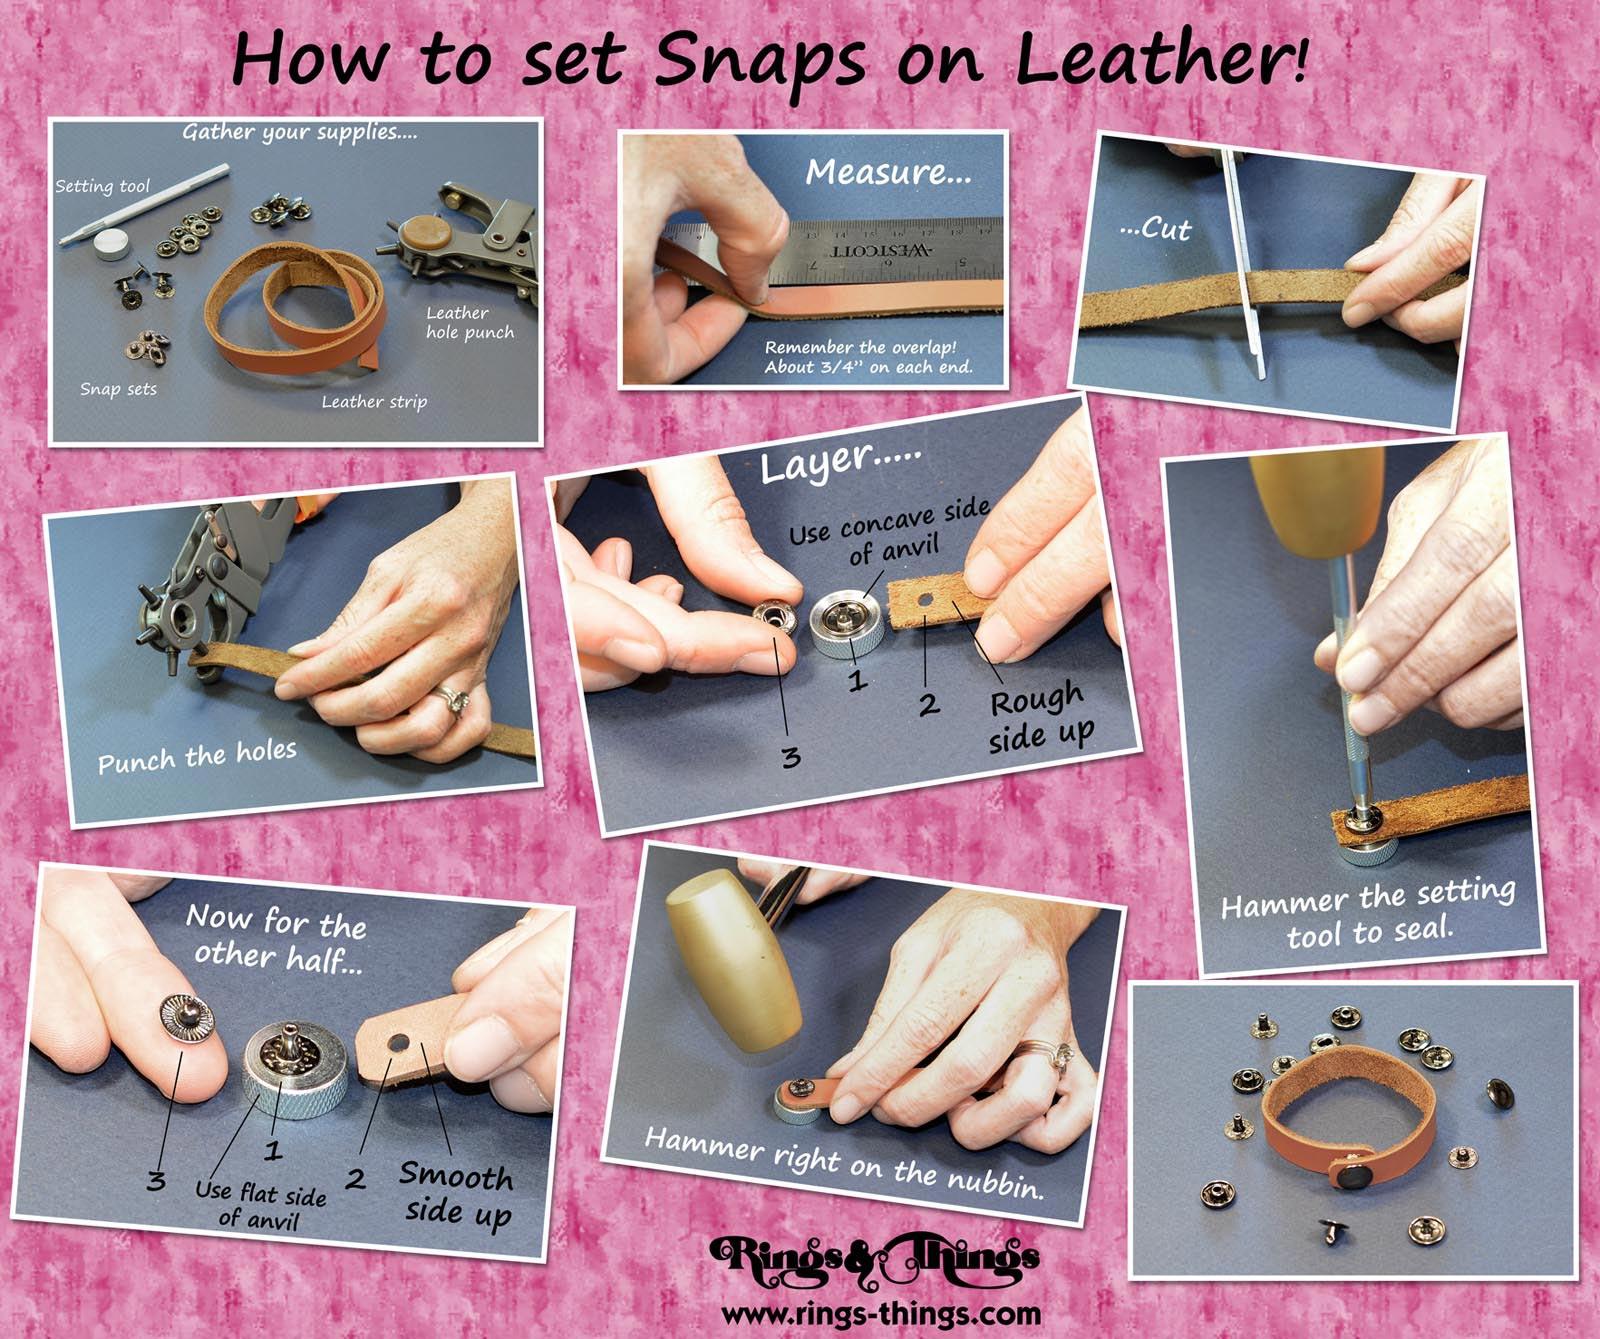 instructions on setting snaps.